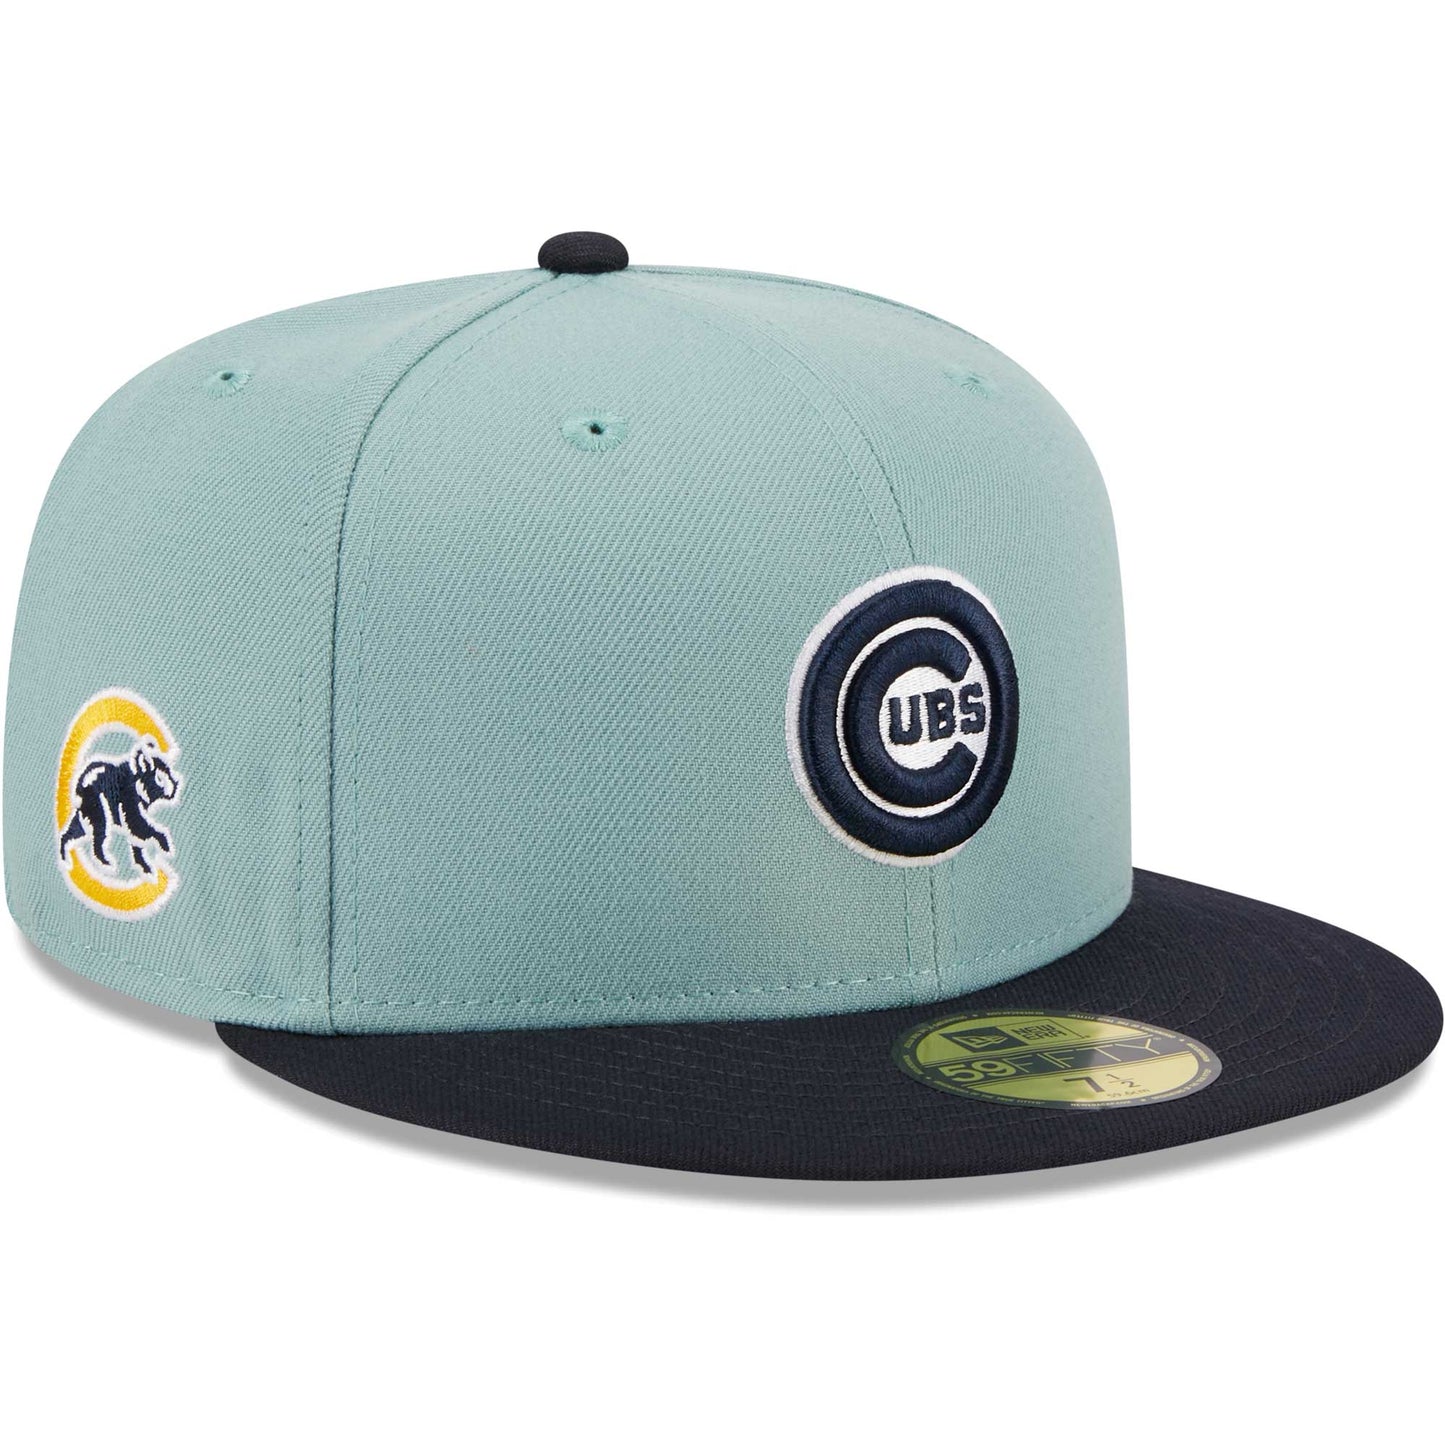 Chicago Cubs New Era Beach Kiss 59FIFTY Fitted Hat - Light Blue/Navy